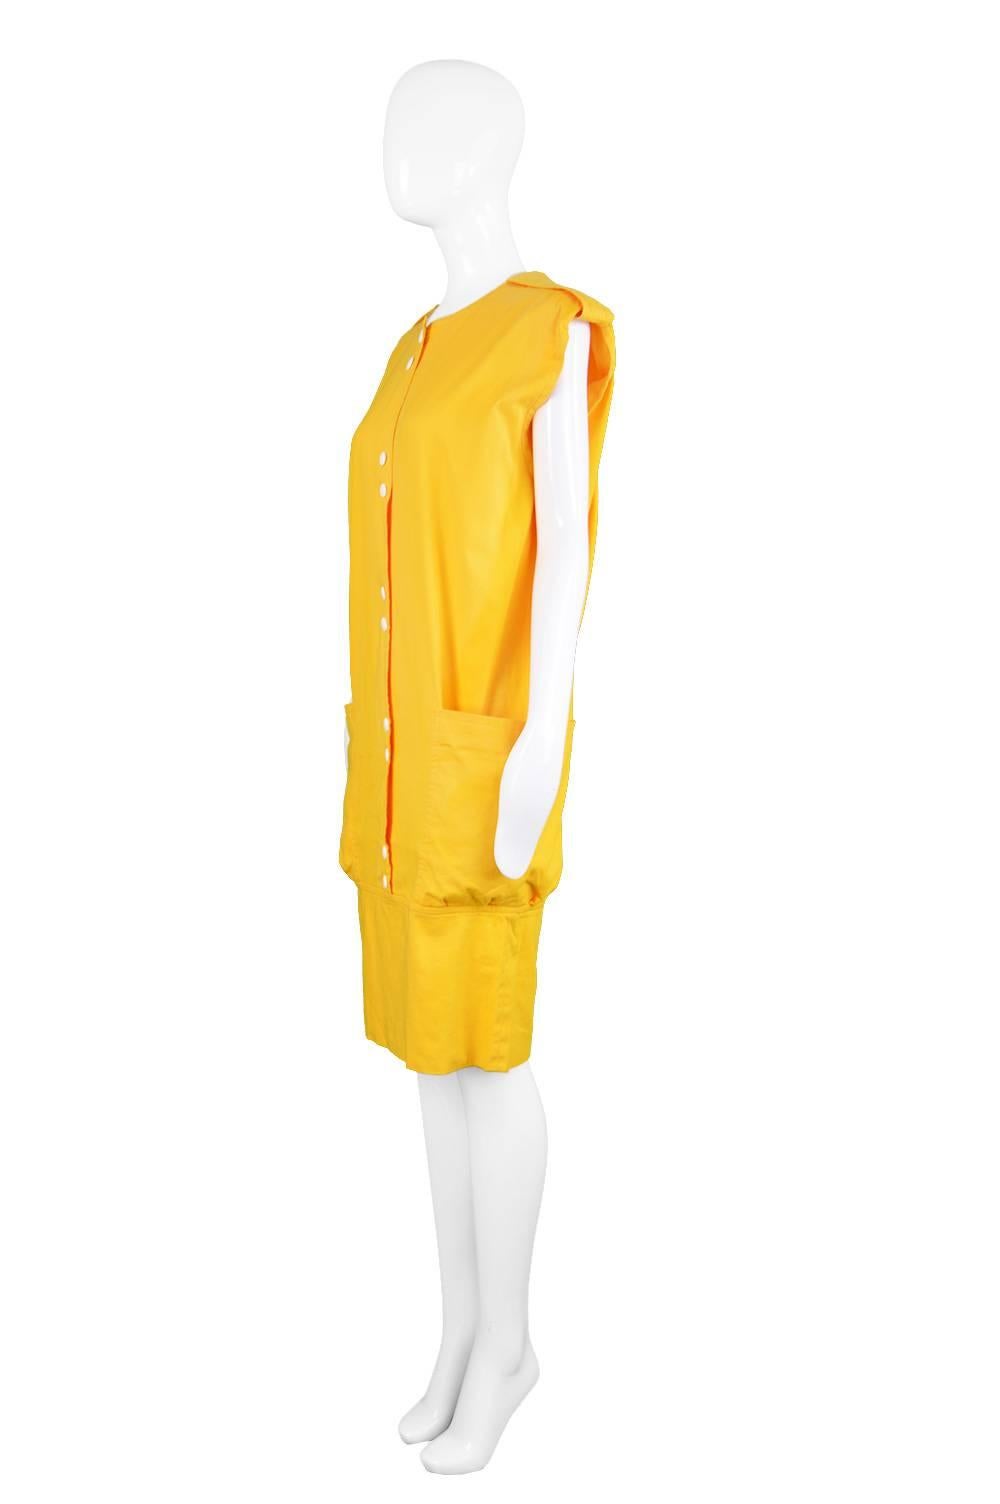 Pierre Cardin Mustard Yellow Dress with Oversized Patch Pockets, 1980s For Sale 2